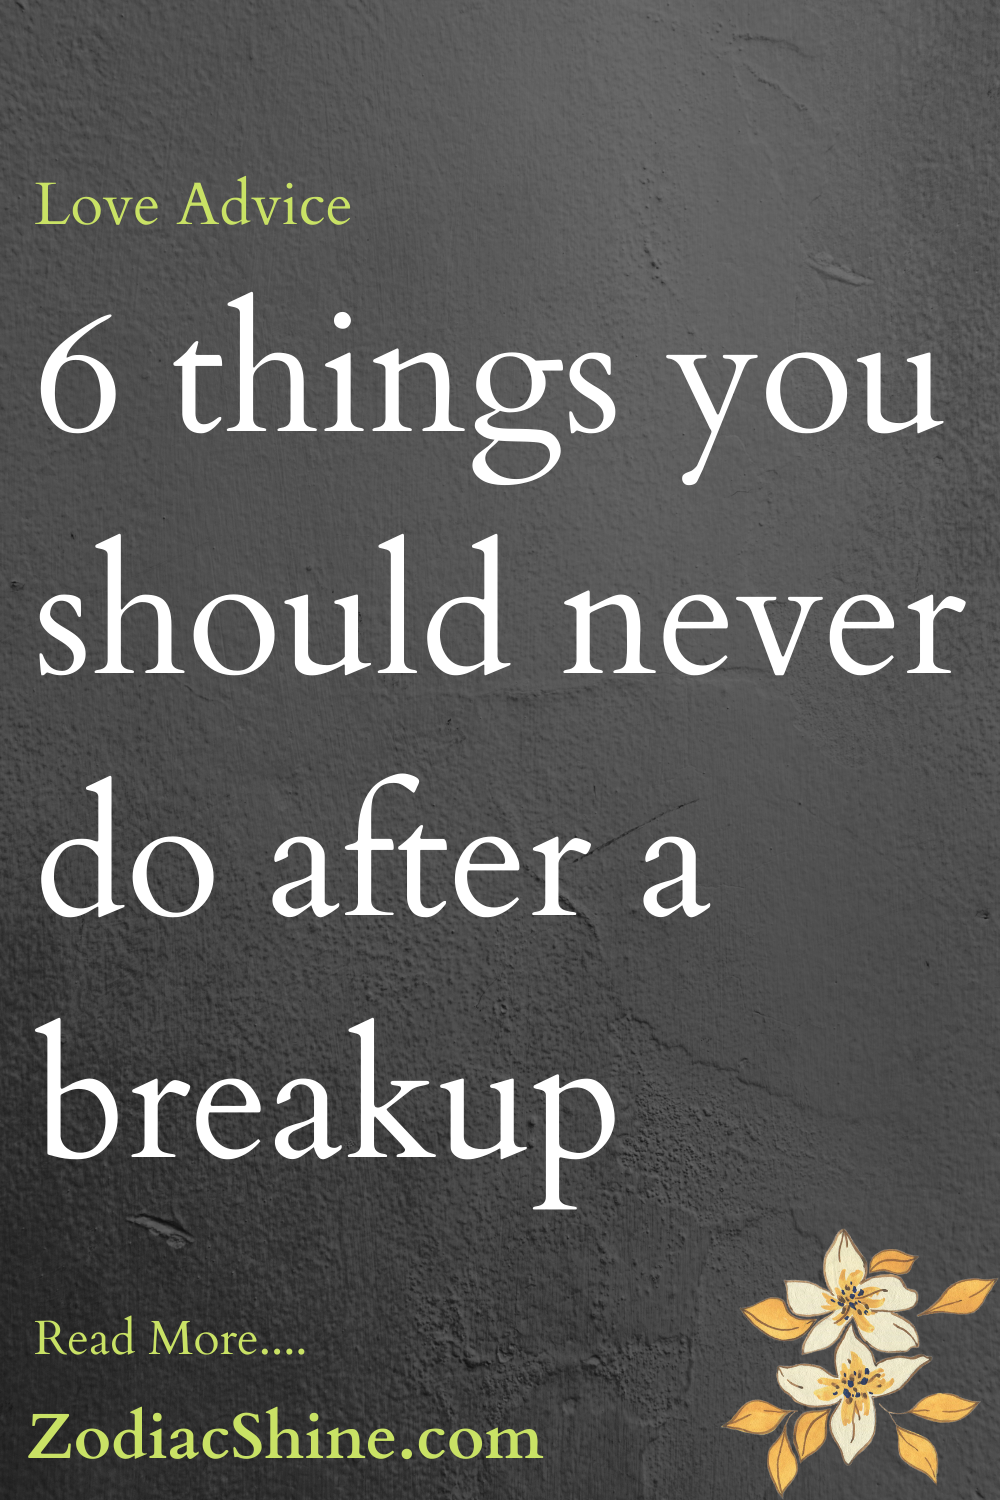 6 things you should never do after a breakup